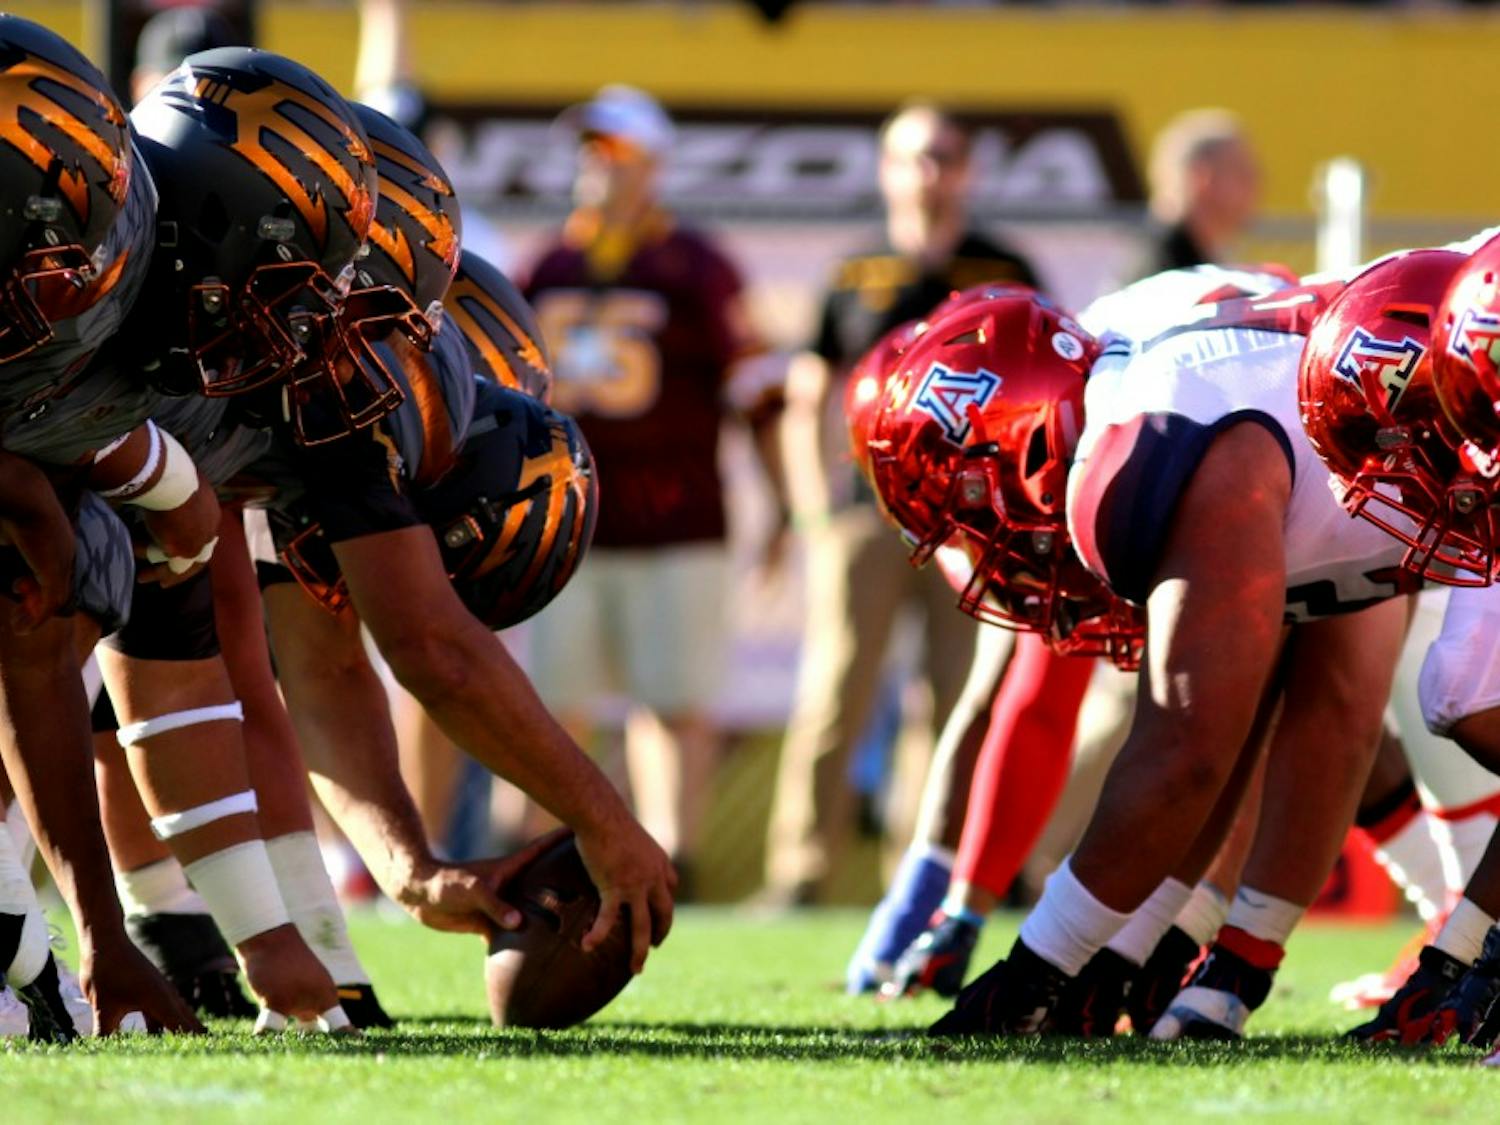 ASU reclaims the Territorial Cup with 52-37 win over UA